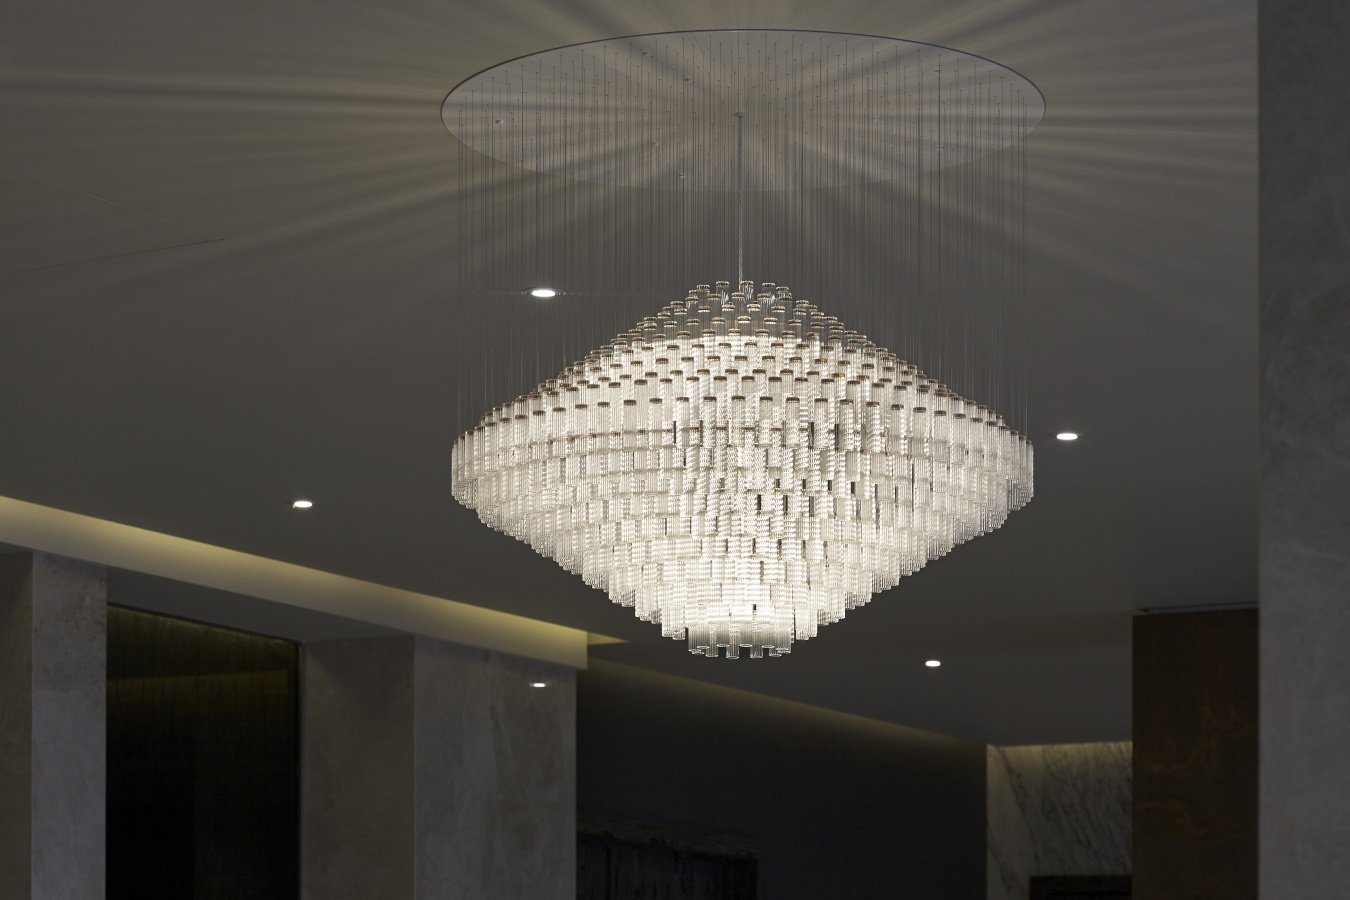 George Singer Modern Chandeliers And Lighting Installations Deco 3 Chandelier High Res Photo 2 Www Georgesinger Co Uk